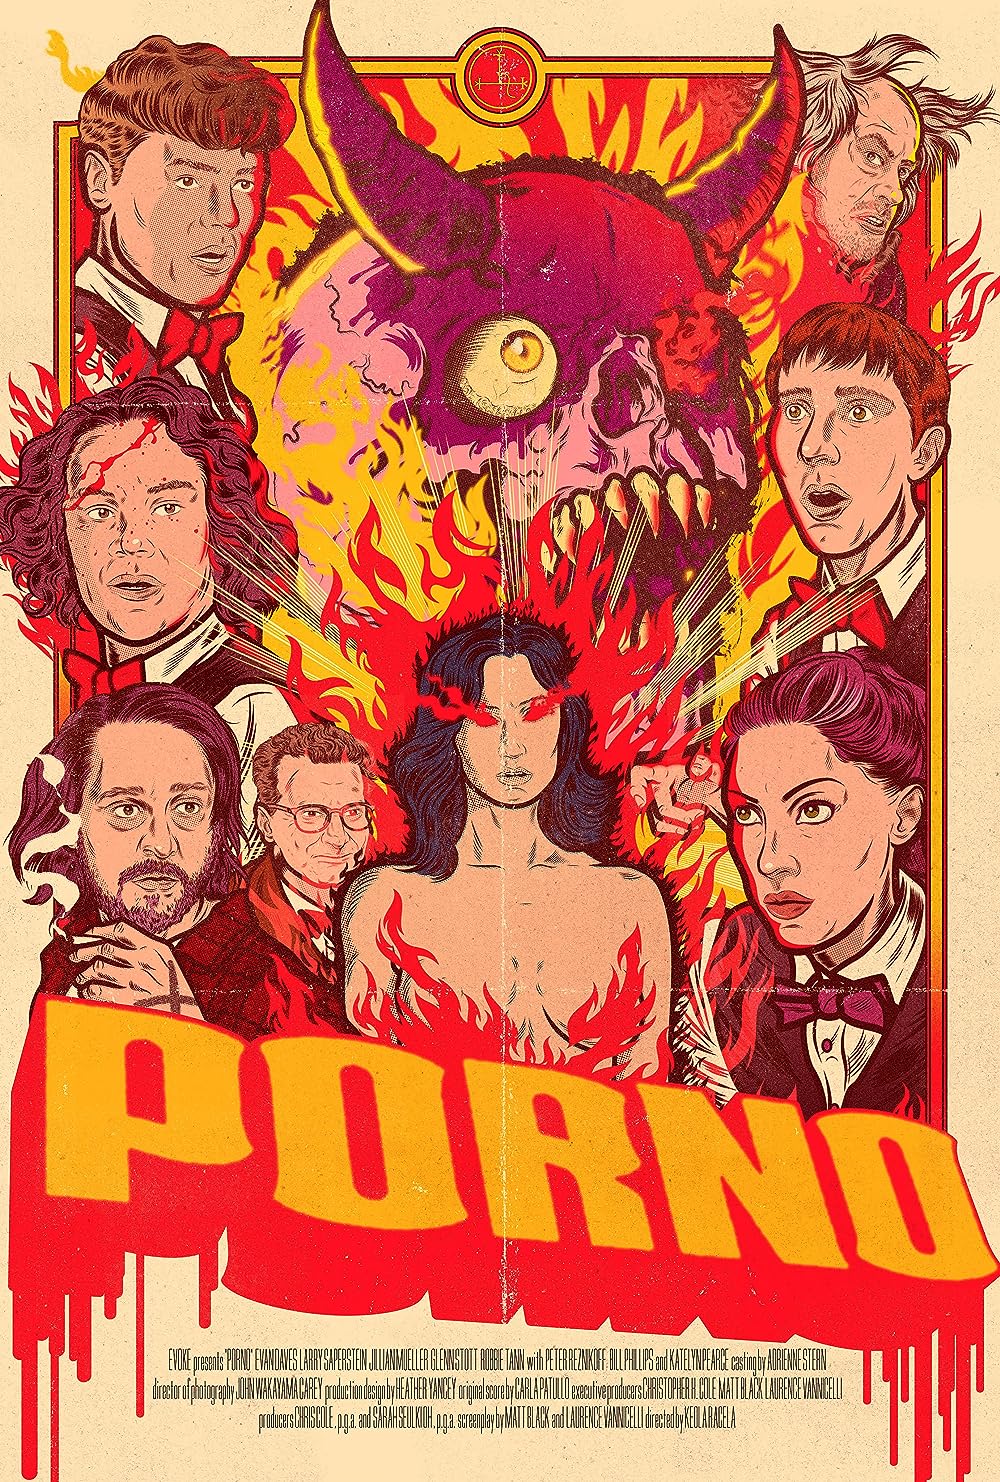 The Other Side blog: October Horror Movie Challenge: Porno (2019)